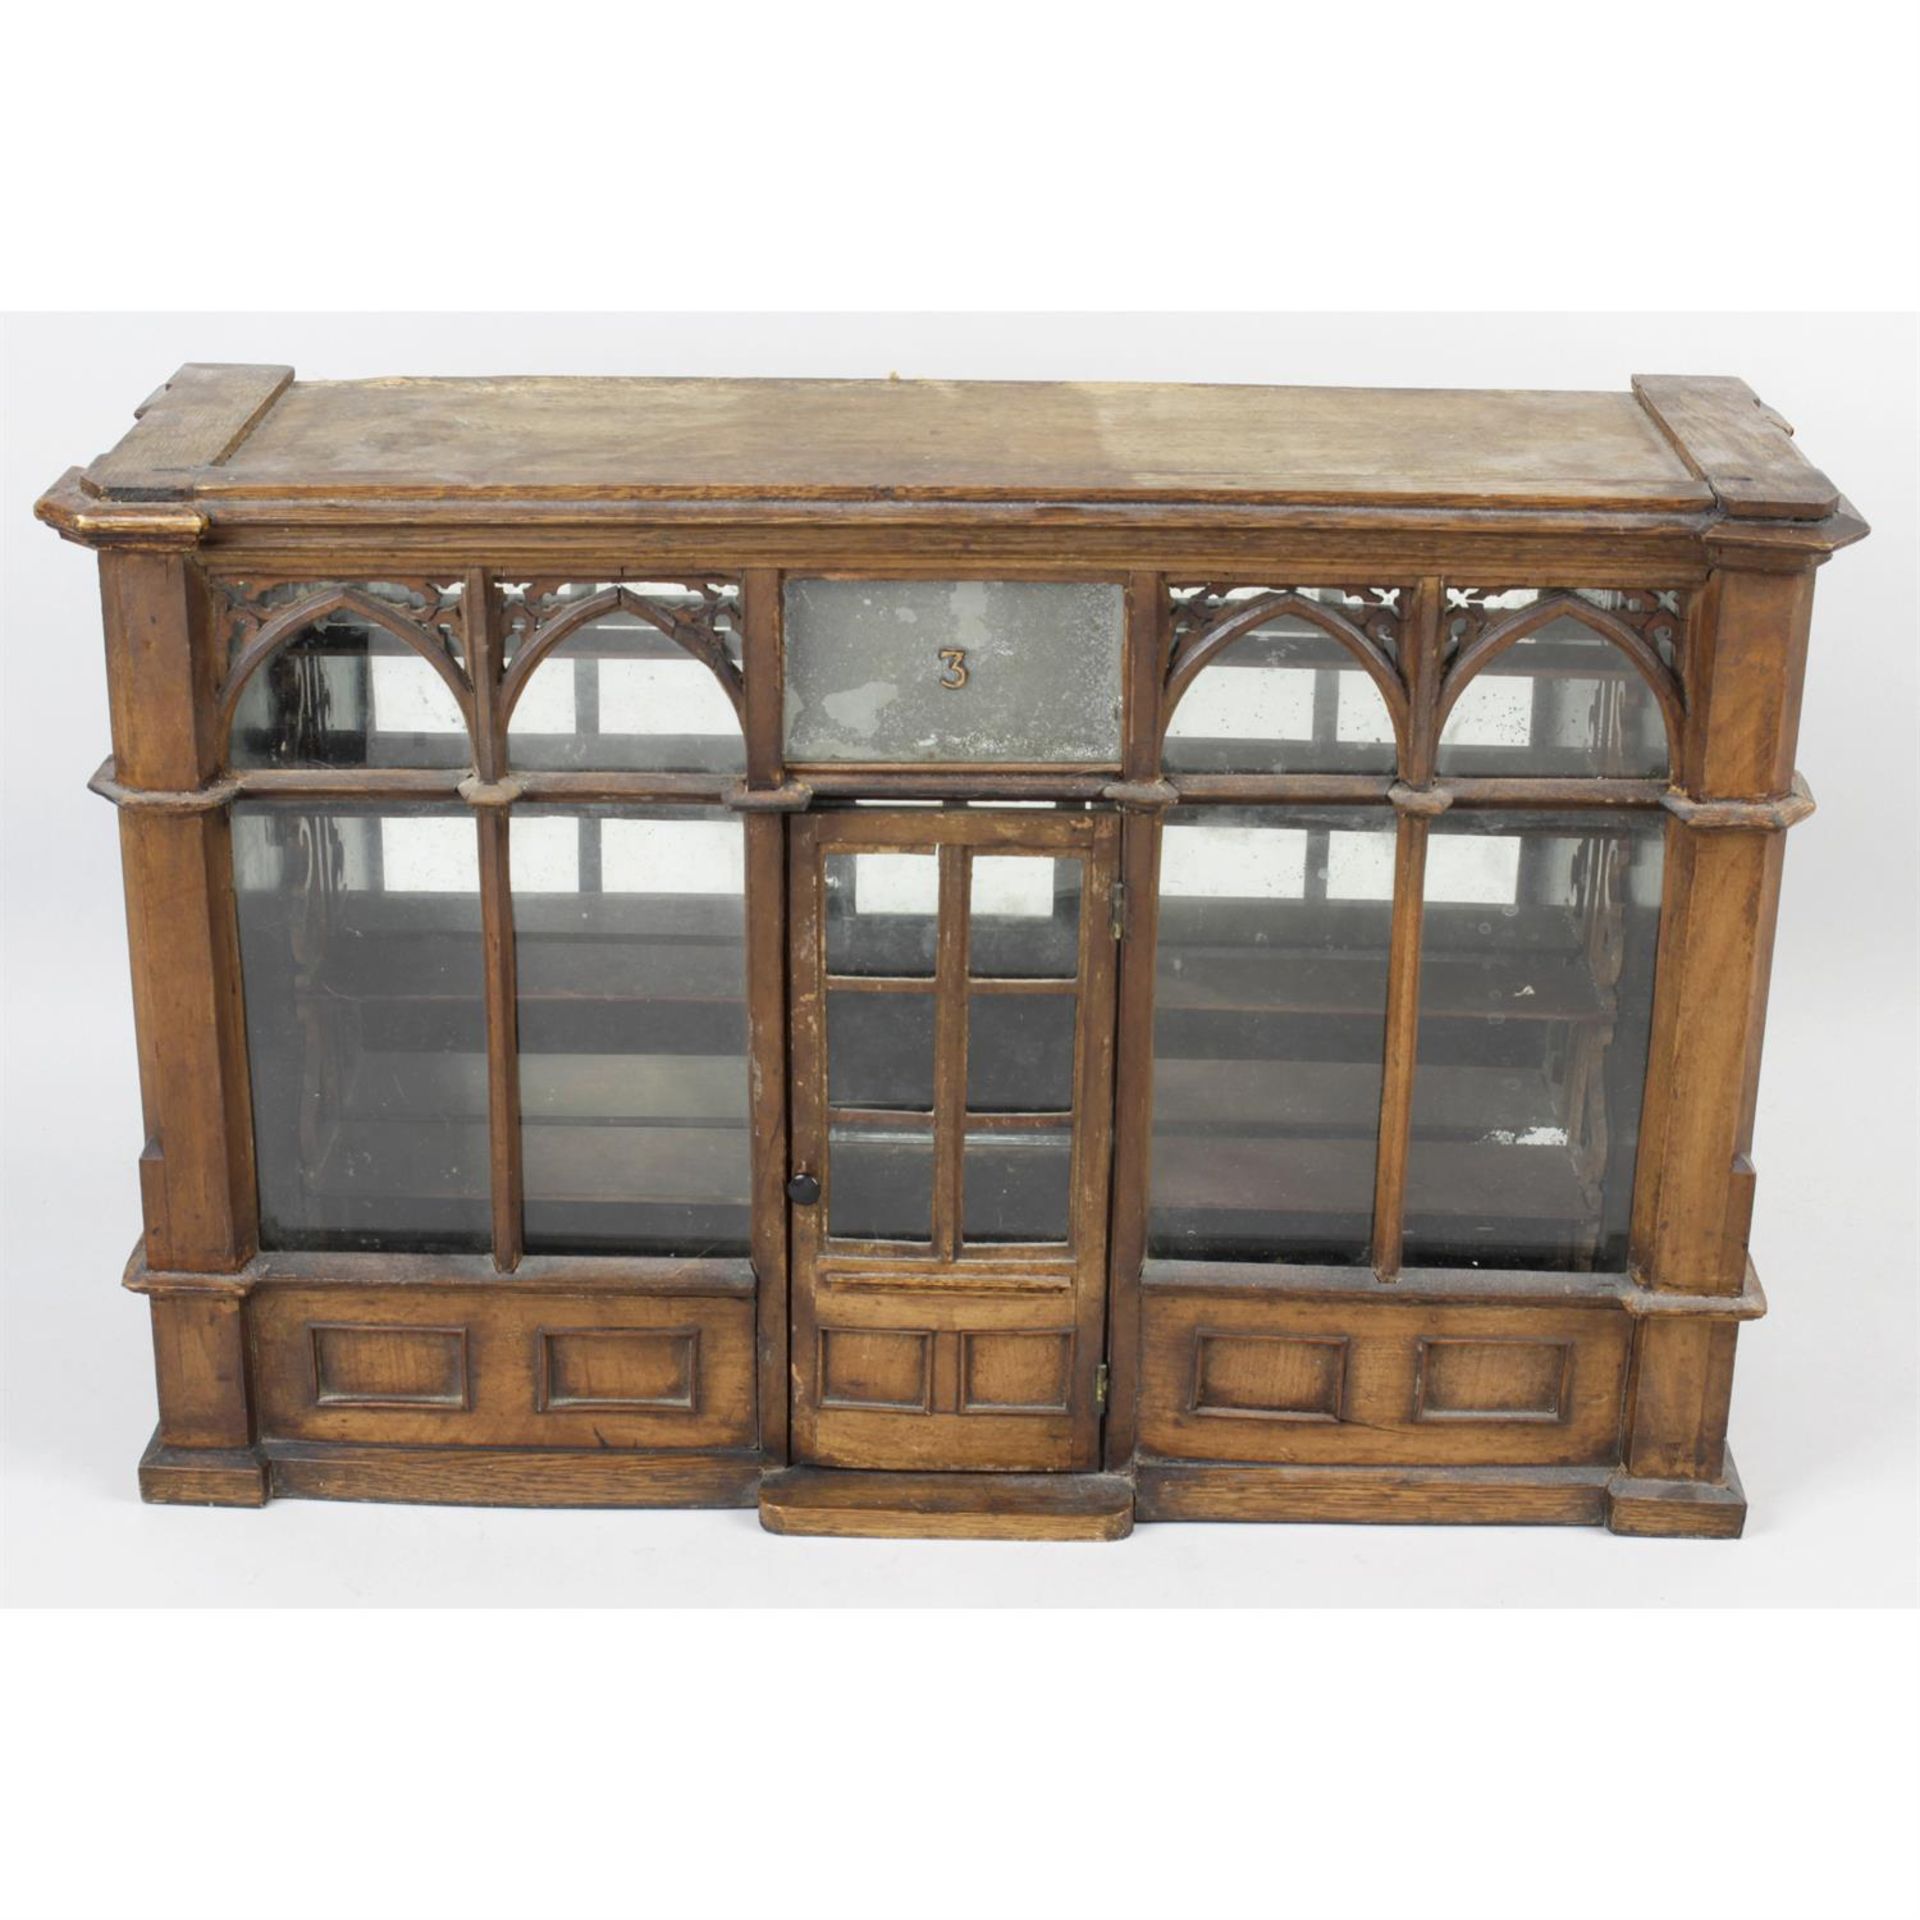 A late 19th century oak and stained wood shop model table display cabinet.